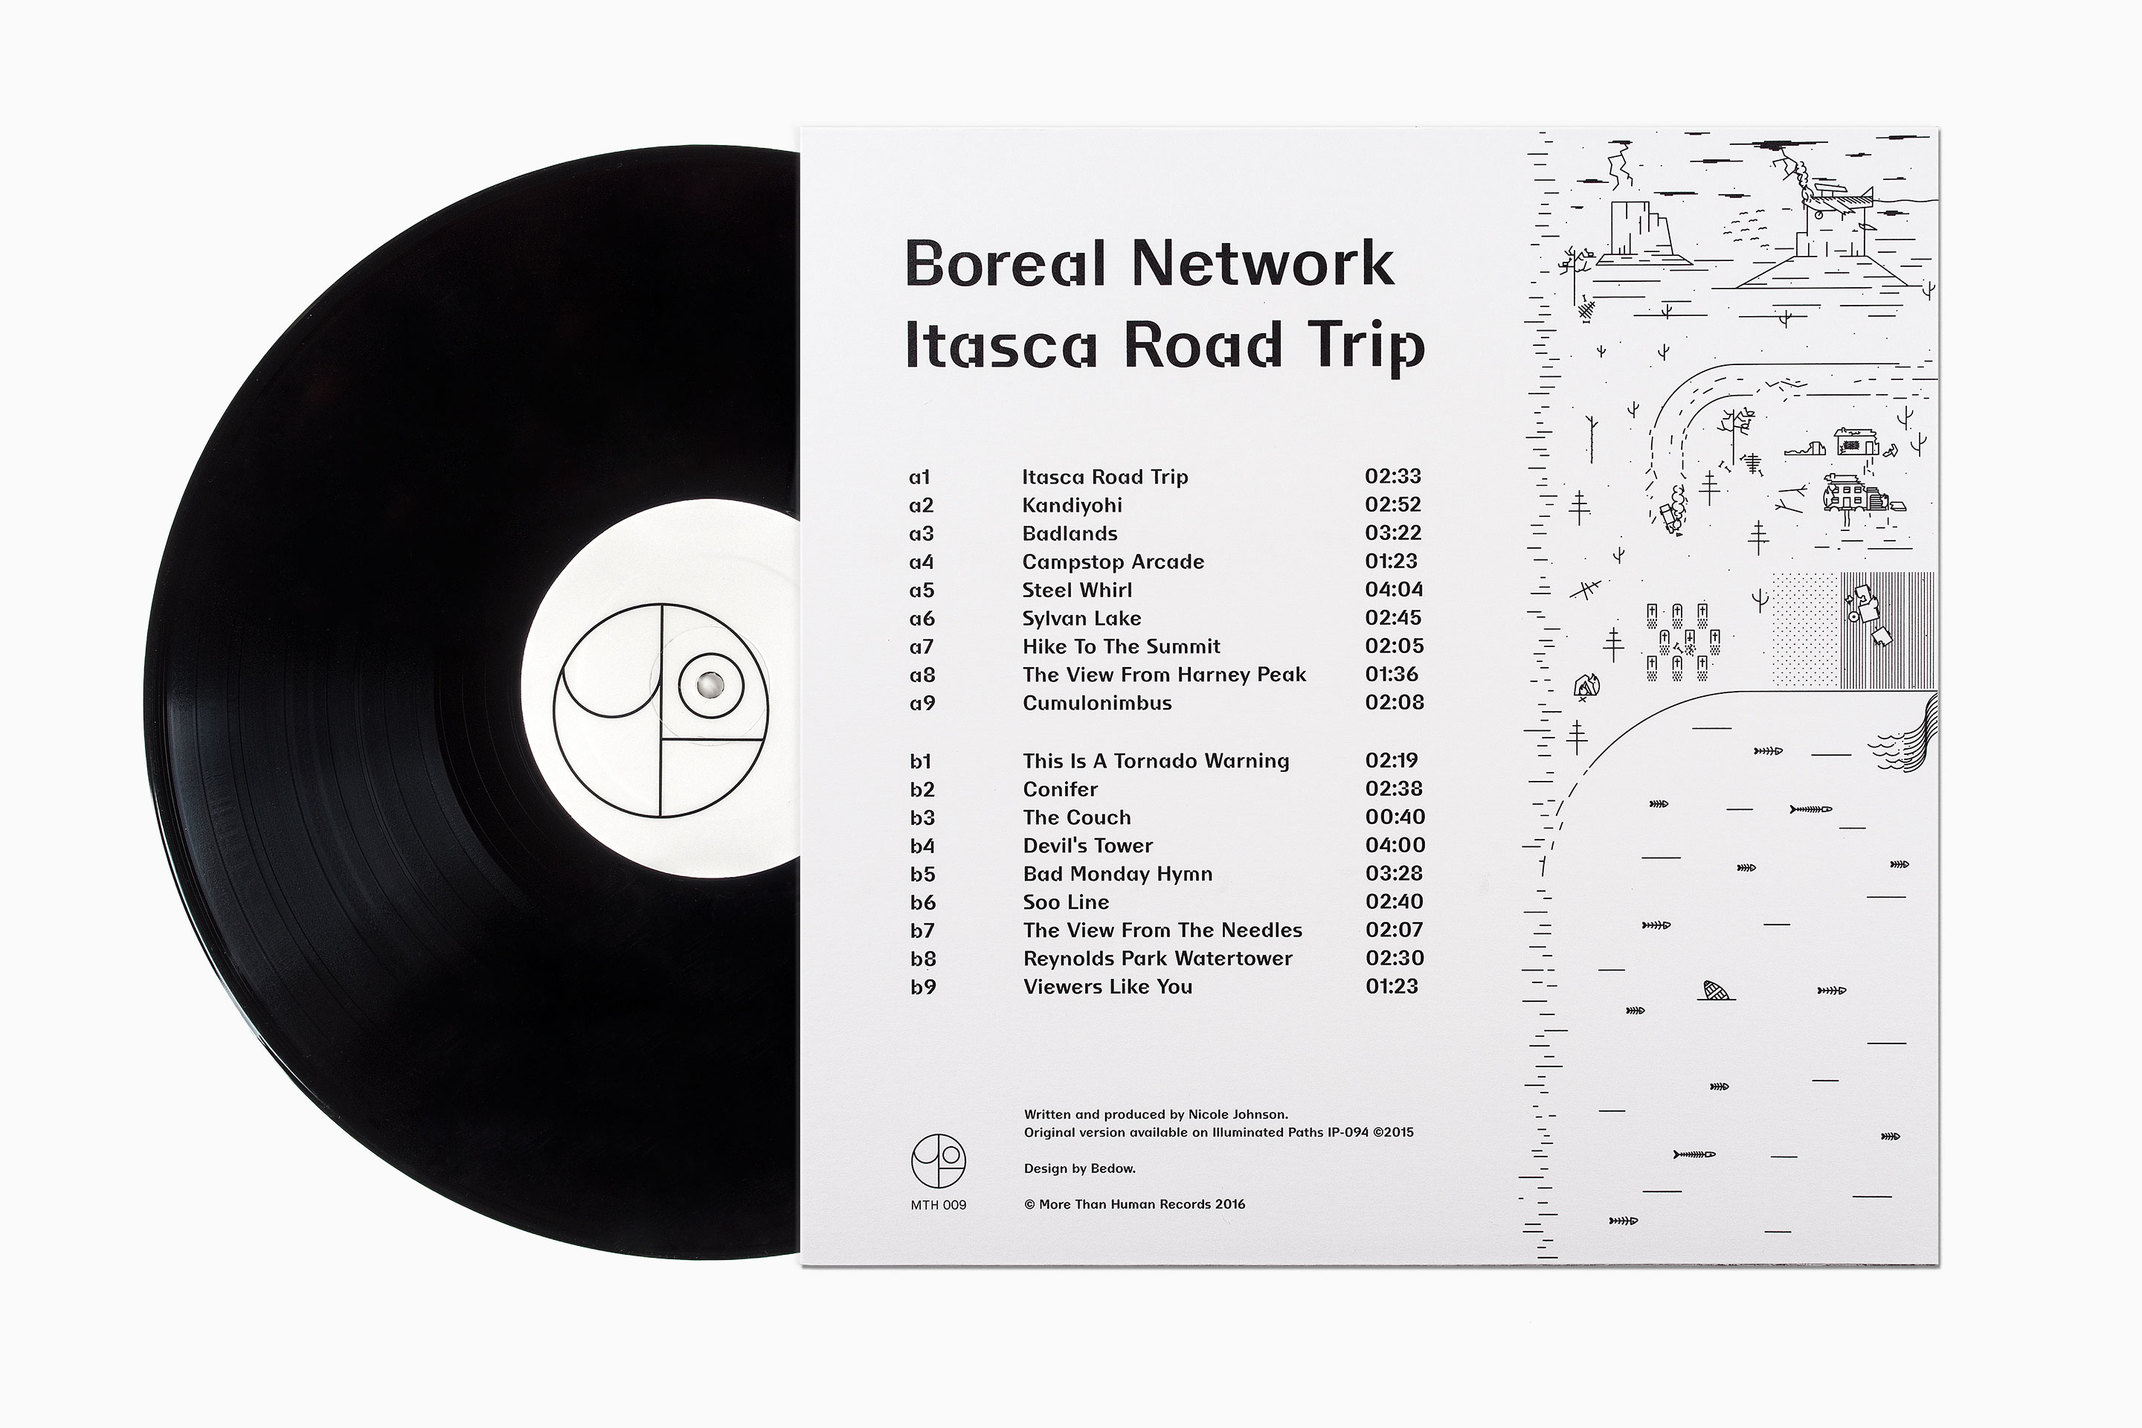 Illustrated record sleeve for Itasca Road Trip by Boreal Network, designed by Bedow, Sweden